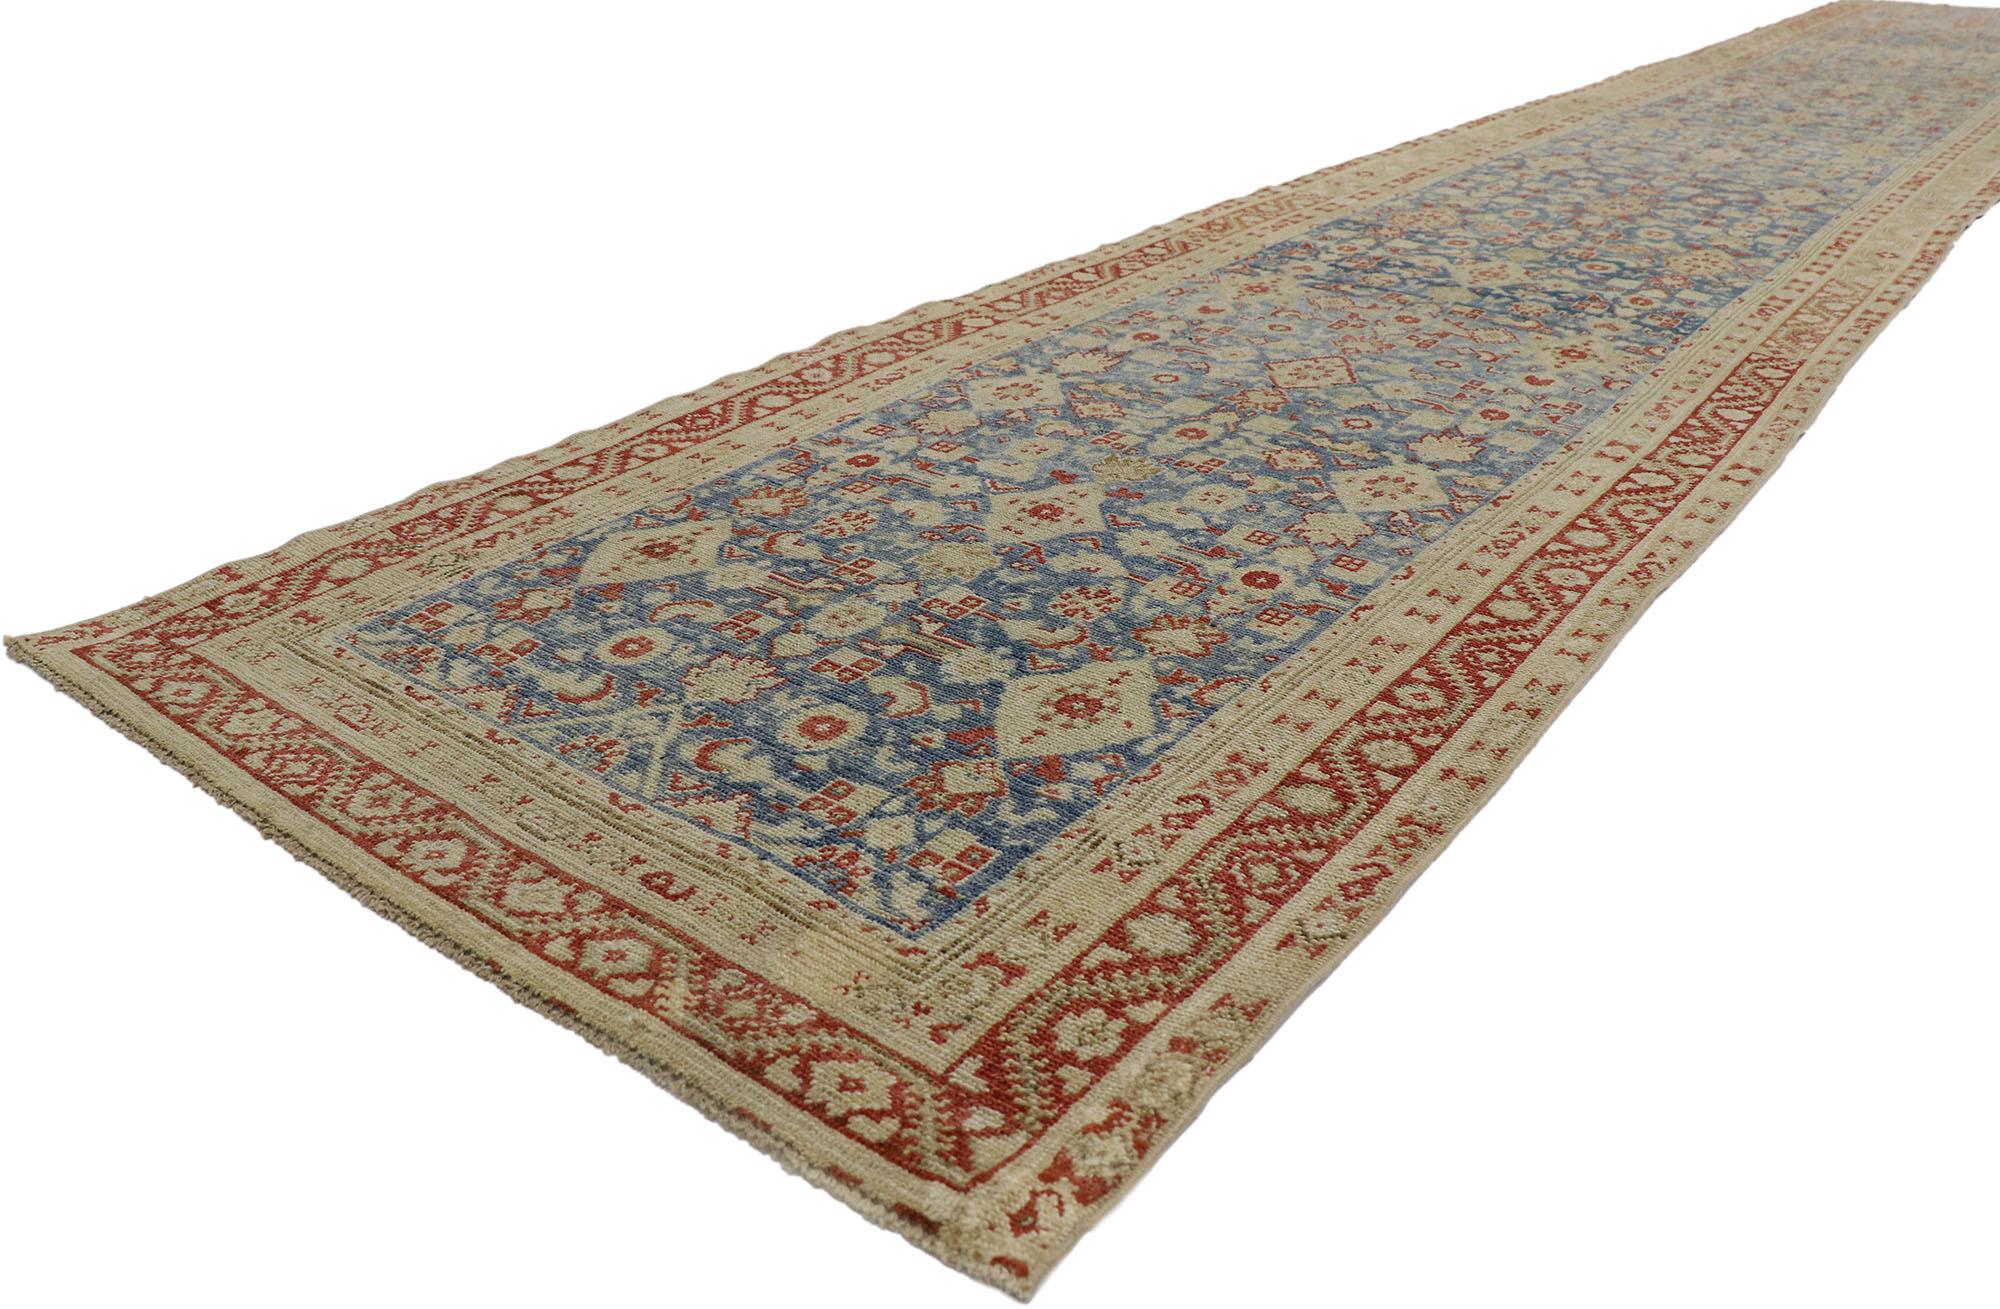 53661 Distressed Antique Persian Malayer runner with Relaxed Federal Style 03'02 x 19'00. Effortless beauty combined with timeless appeal and architectural design elements, this hand knotted wool distressed antique Persian Malayer runner can